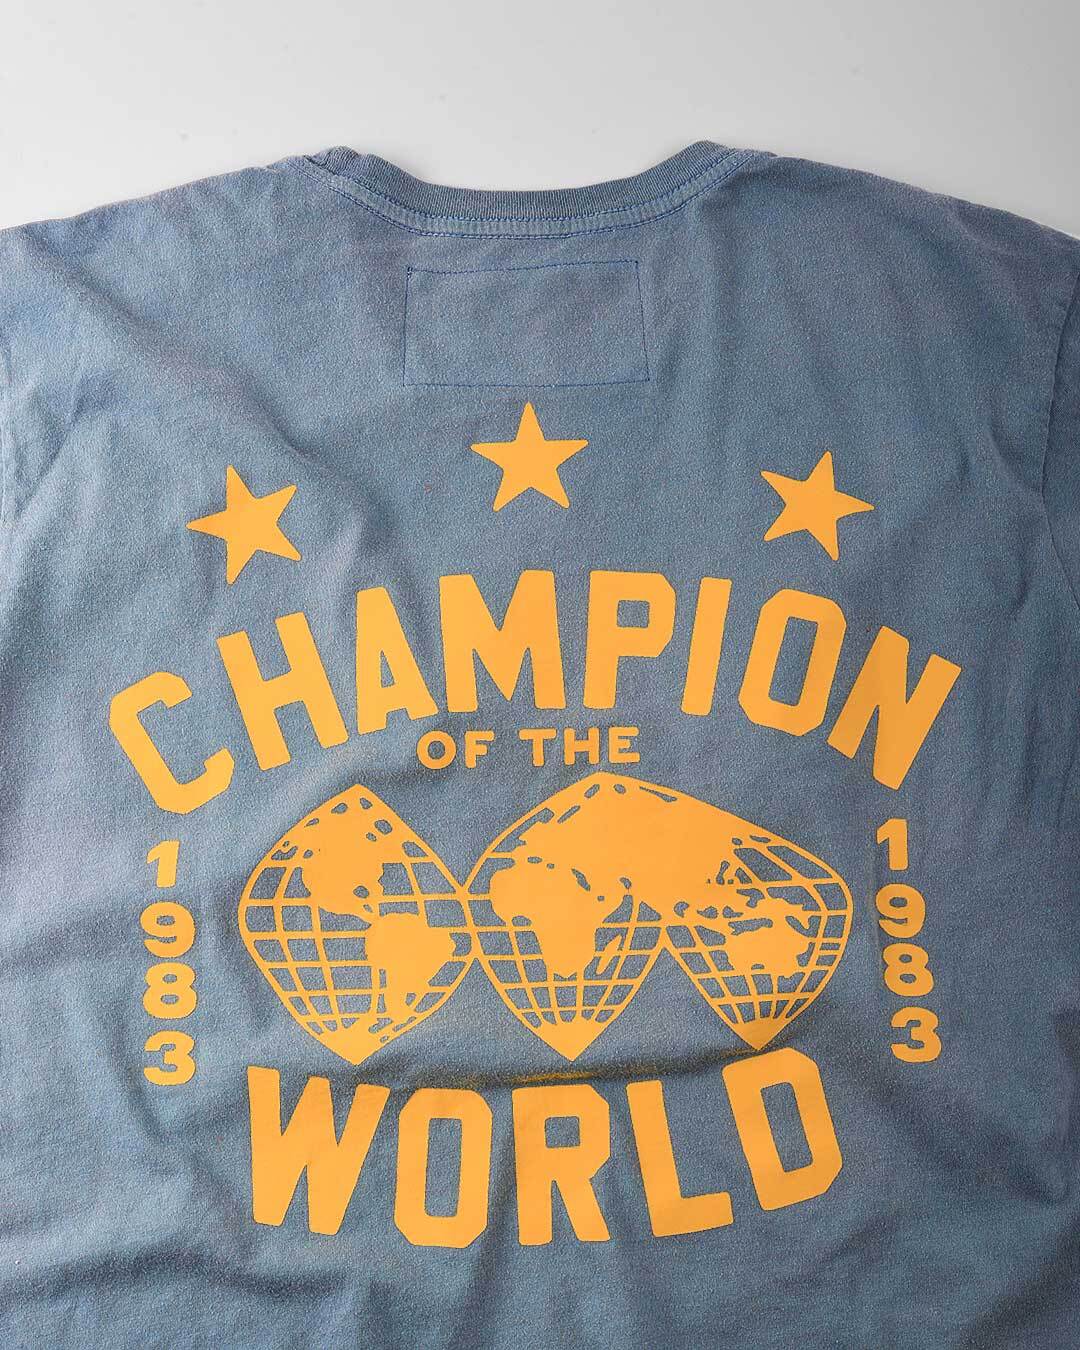 The Iron Sheik 1983 Champ Blue Tee - Roots of Fight